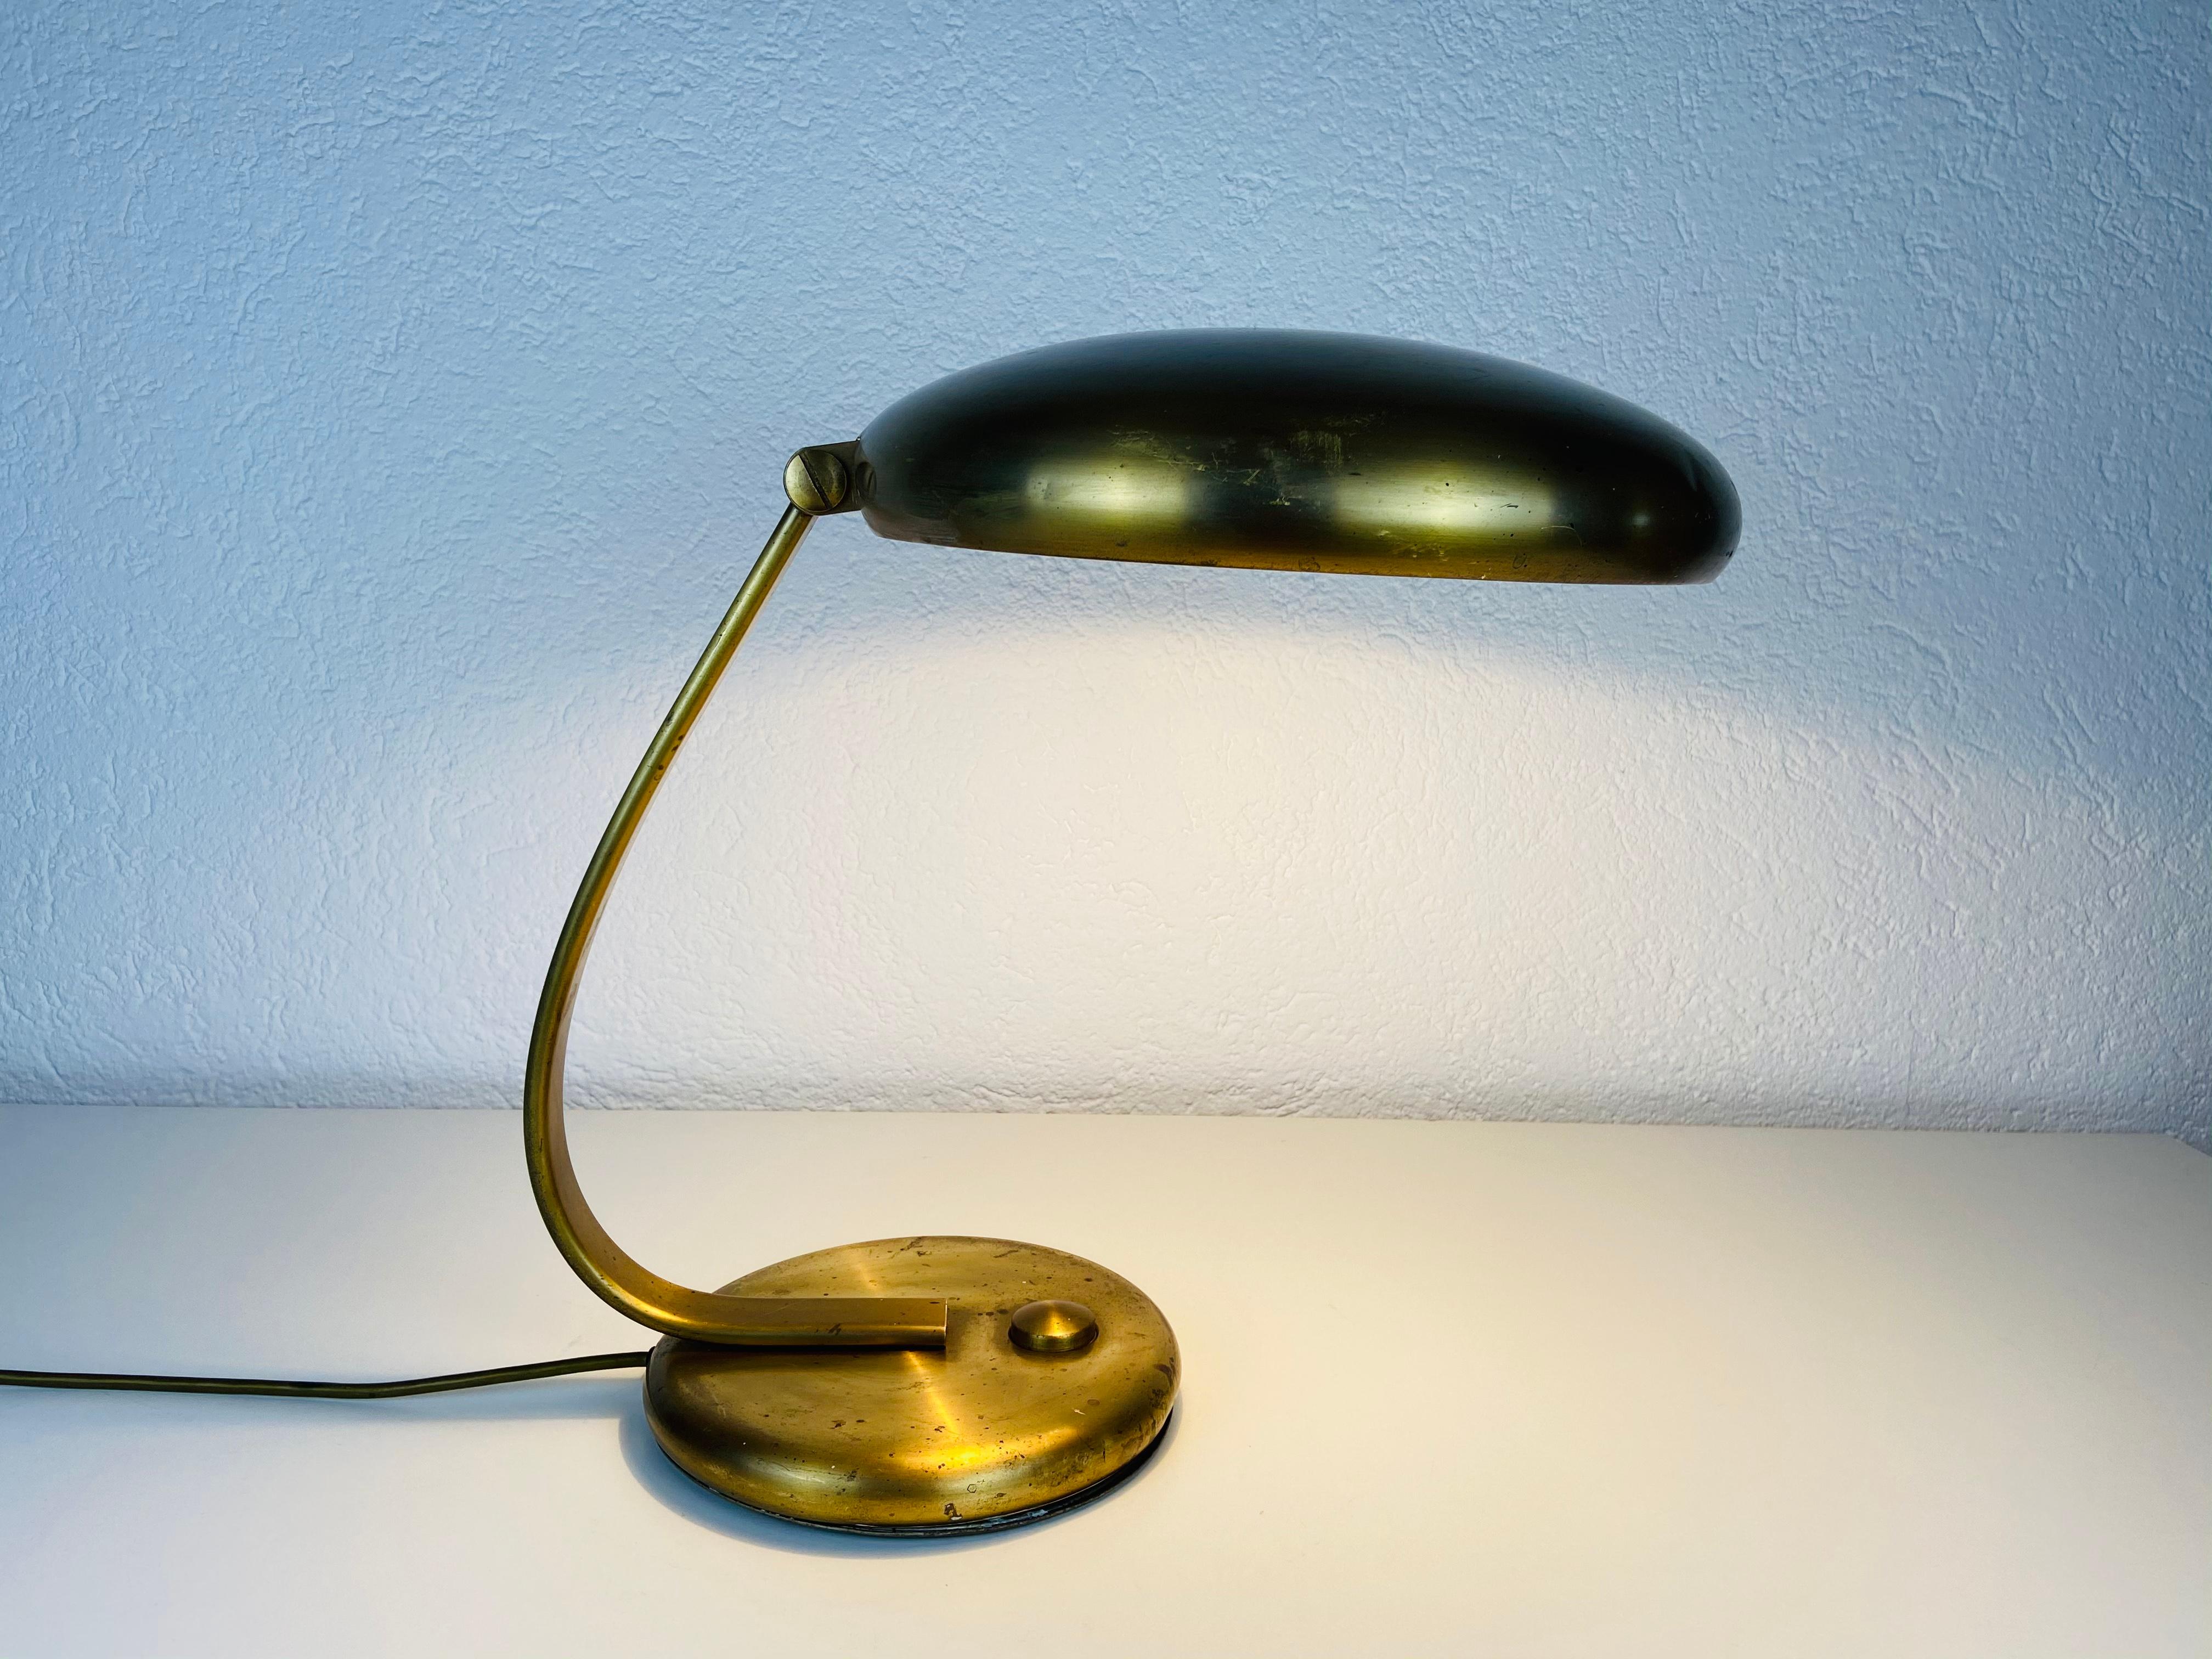 A Hillebrand table lamp made in Germany in the 1960s.

The light requires one E27 (US E26) light bulb. Works with both 220V/120V.

Free worldwide express shipping.